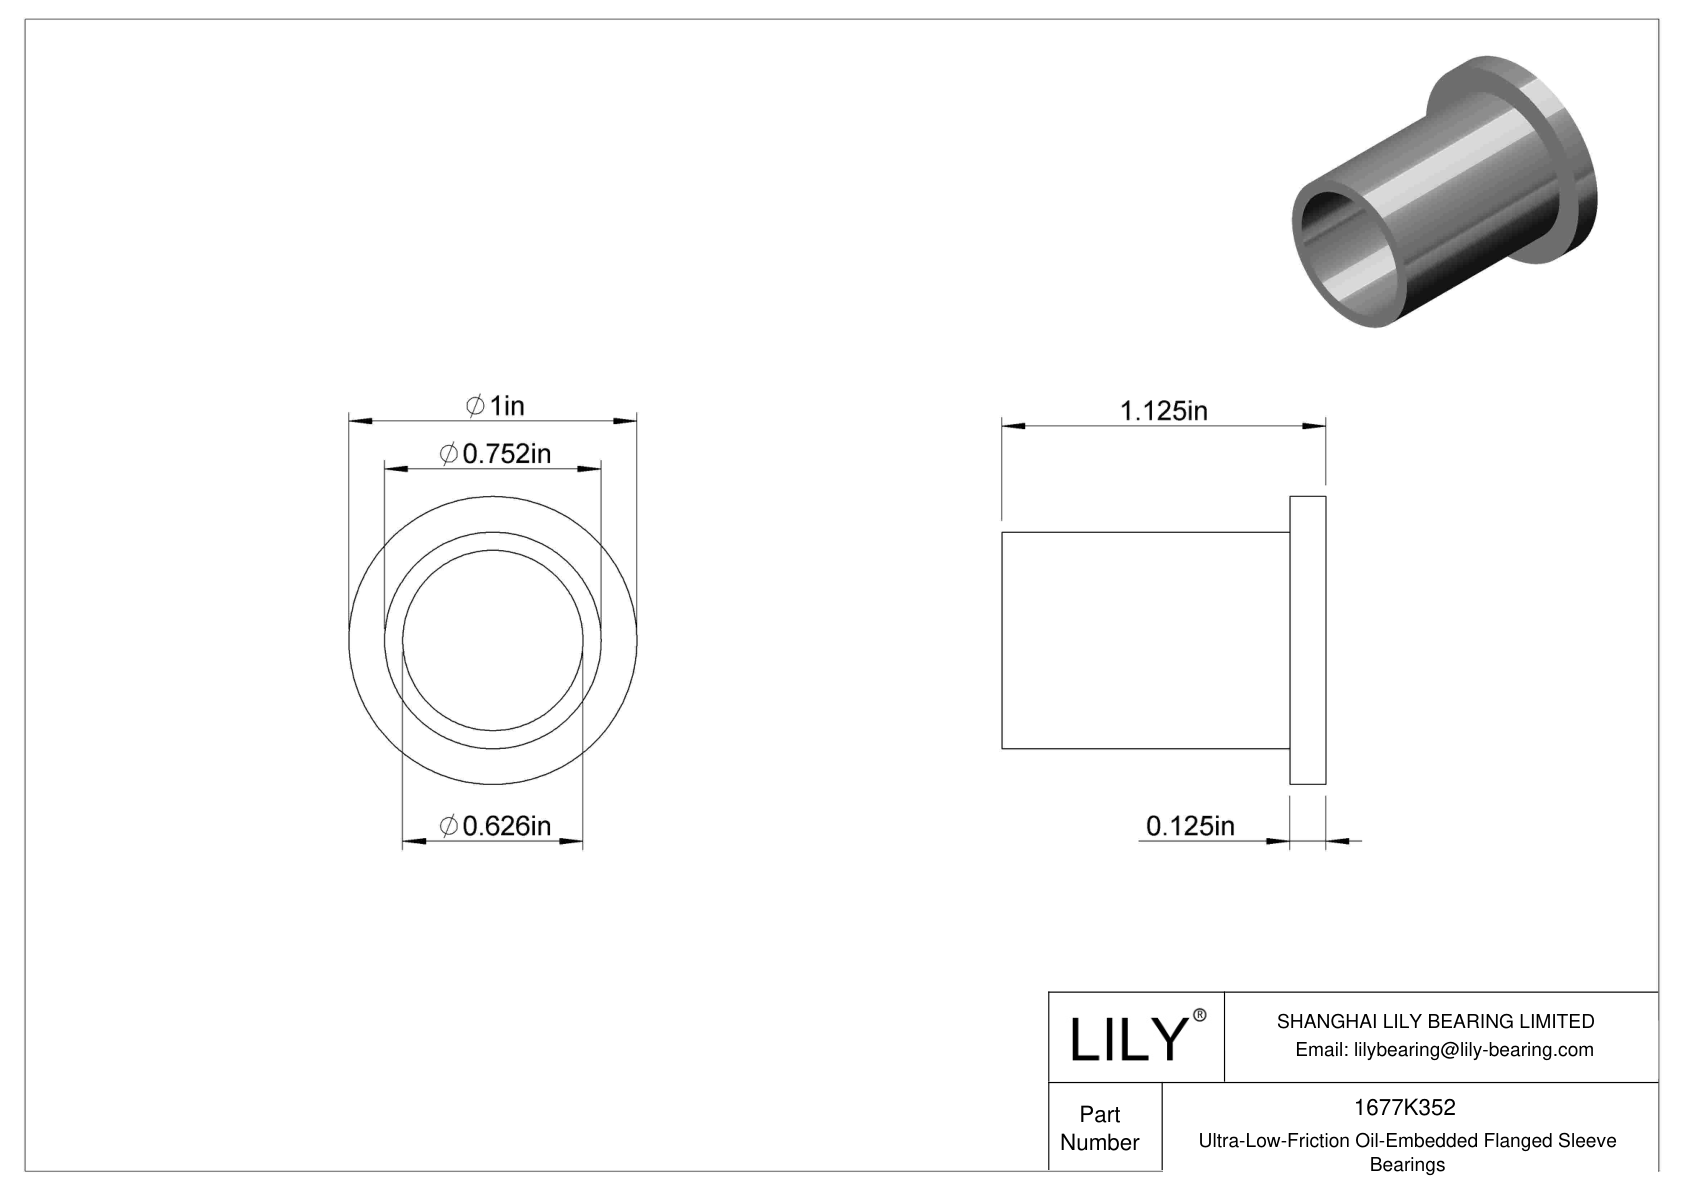 BGHHKDFC Ultra-Low-Friction Oil-Embedded Flanged Sleeve Bearings cad drawing